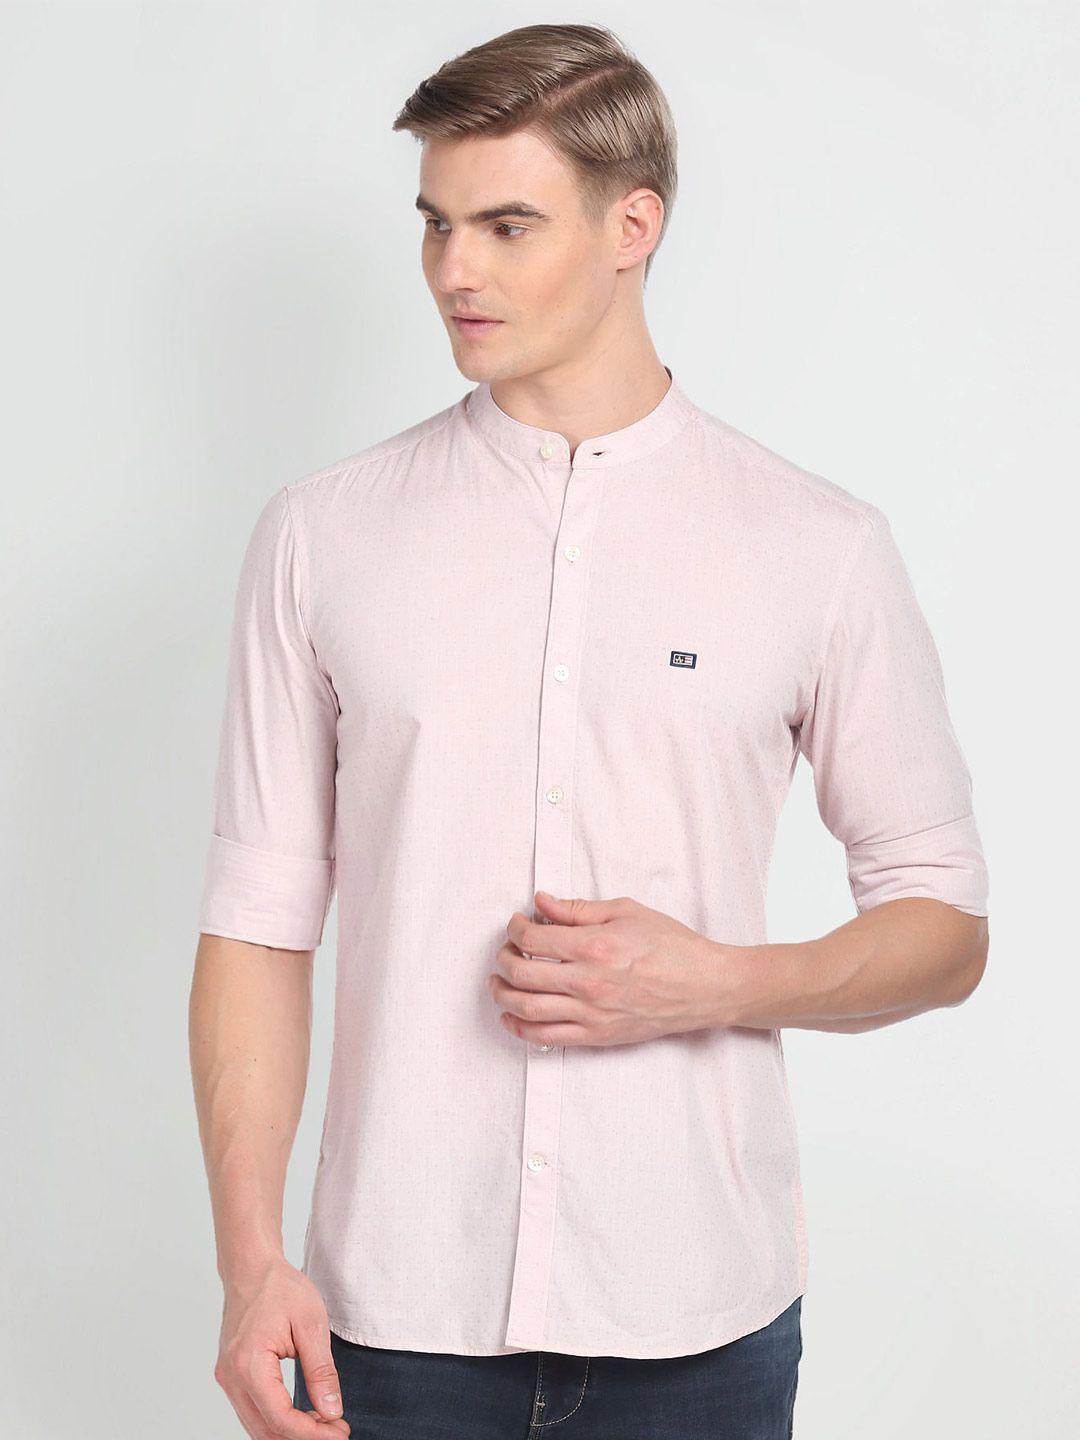 arrow sport slim fit band collar casual pure cotton shirt